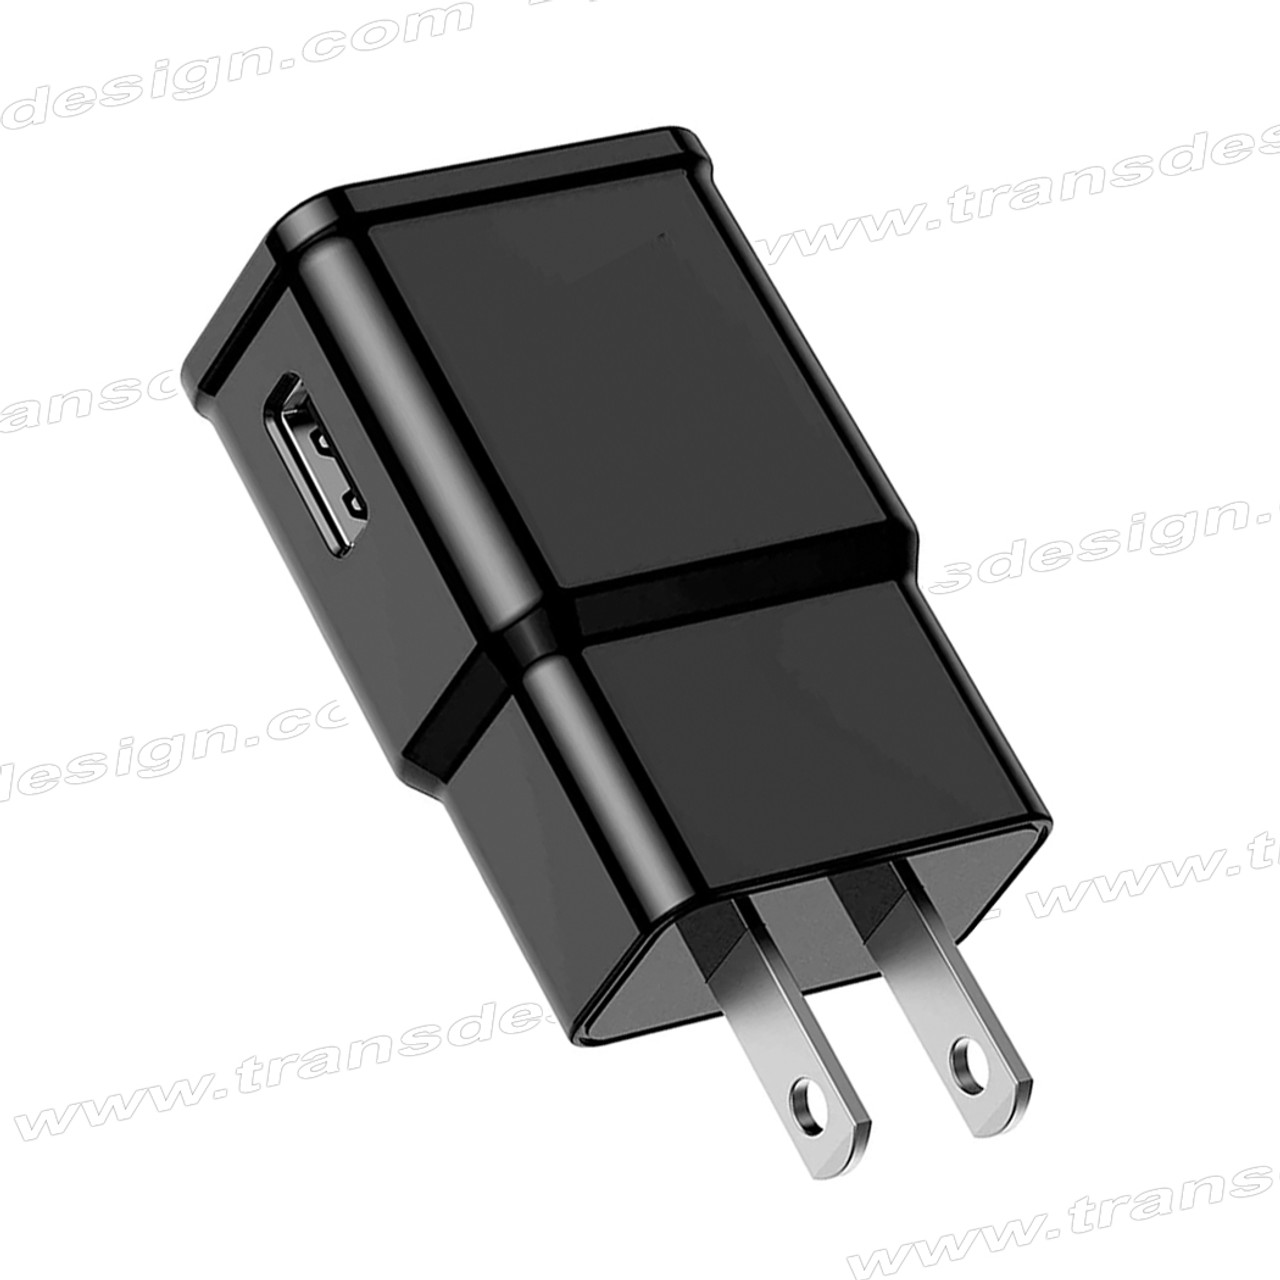 USB to 3.5mm DC 5V Charger Cable Connector Power Supply Charge Adapter Jack  US